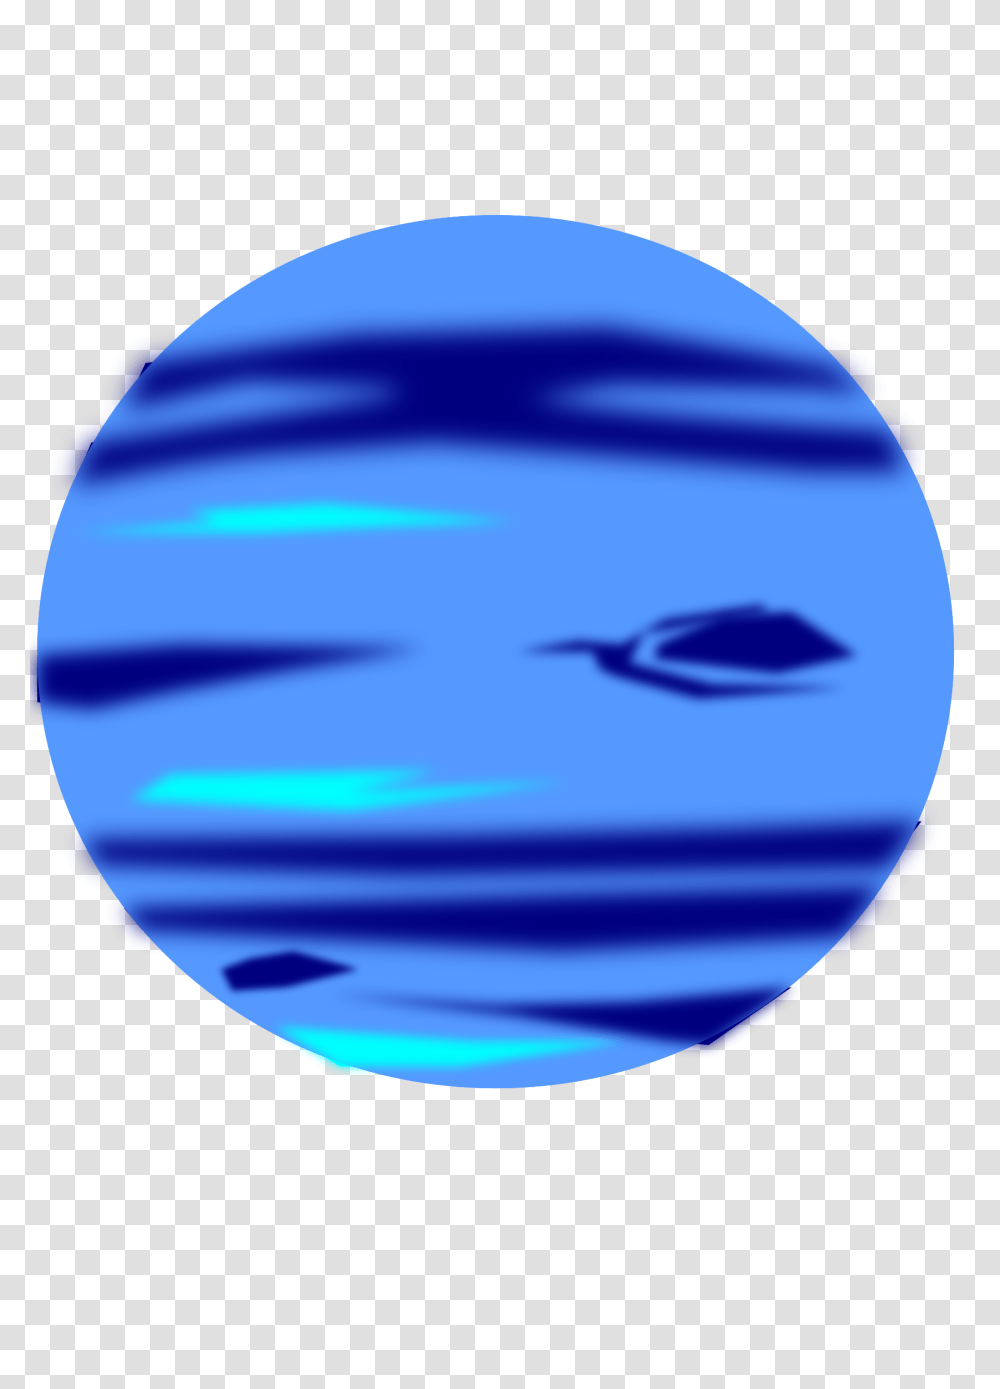 Download Free My Planet Uranus Neptuno, Sphere, Outer Space, Astronomy, Universe Transparent Png